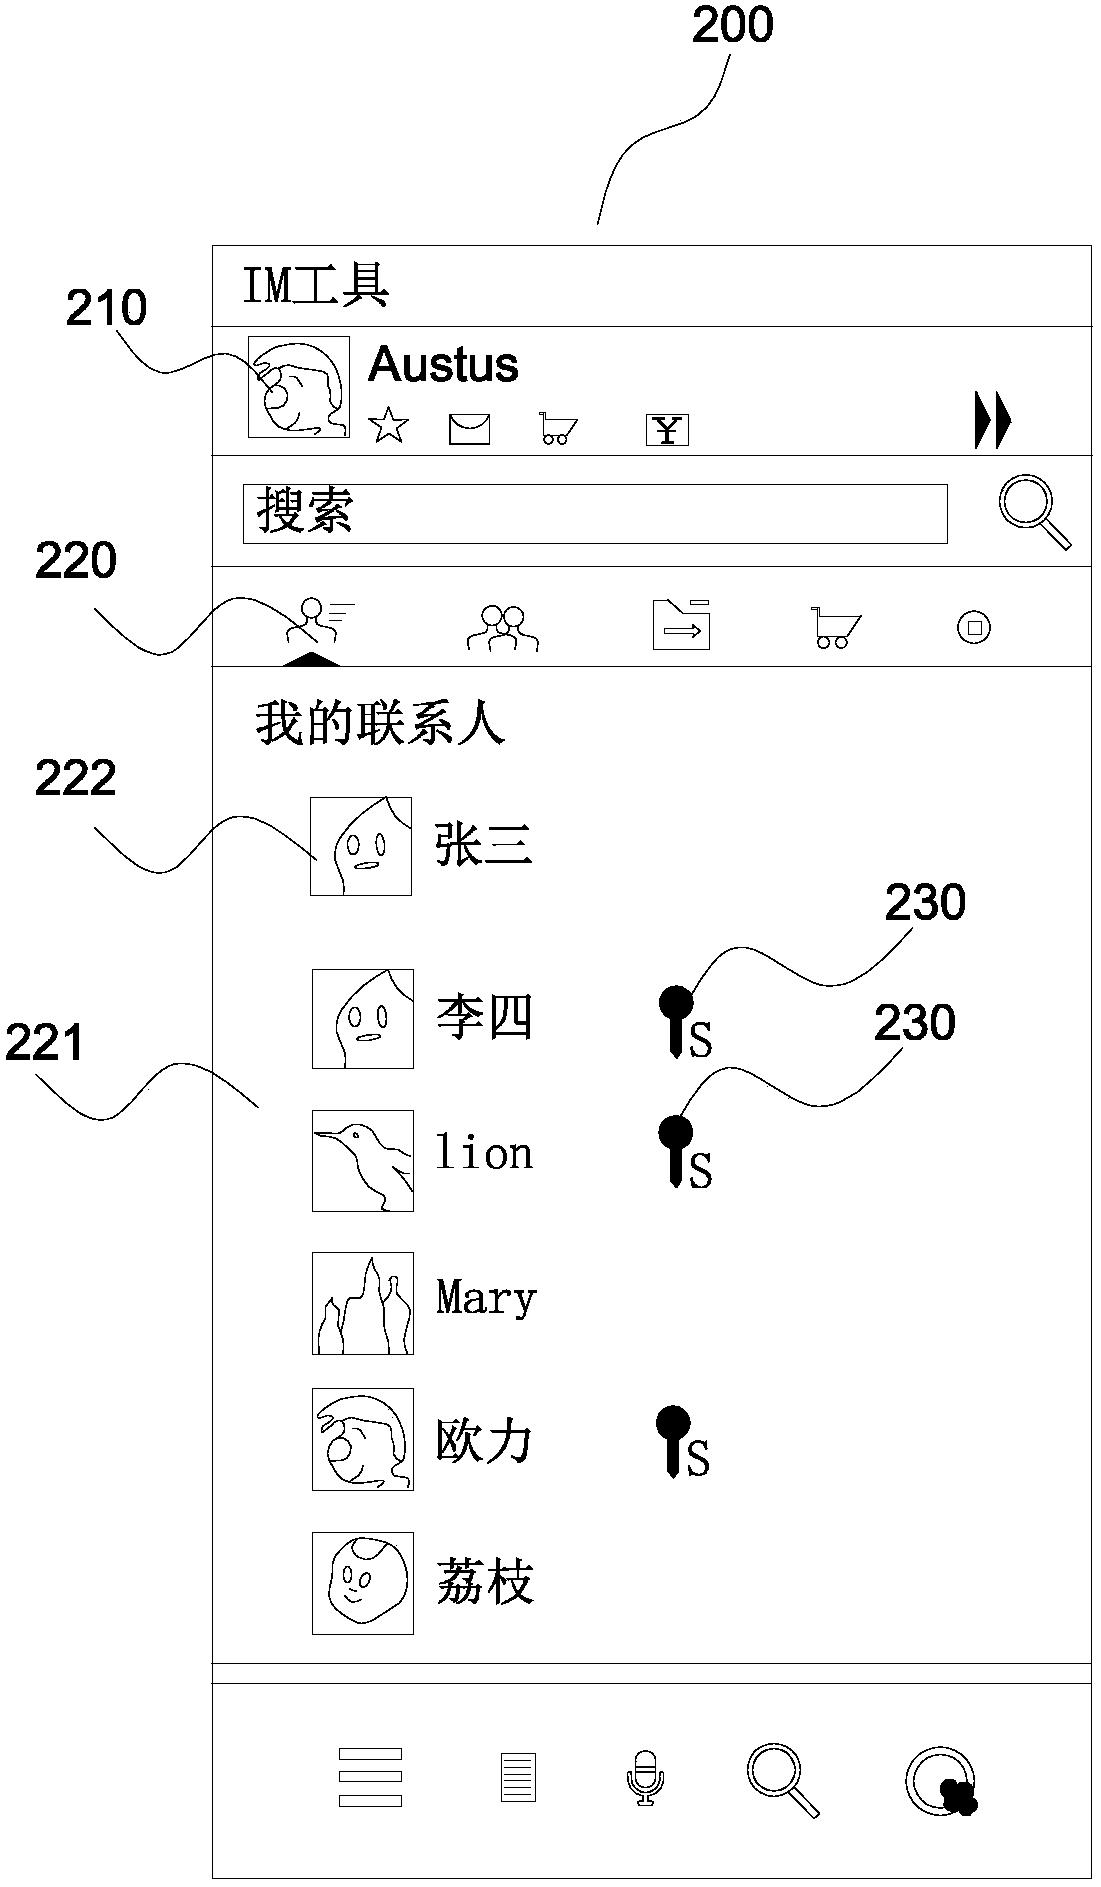 Signature notification method and system, and instant messaging tool